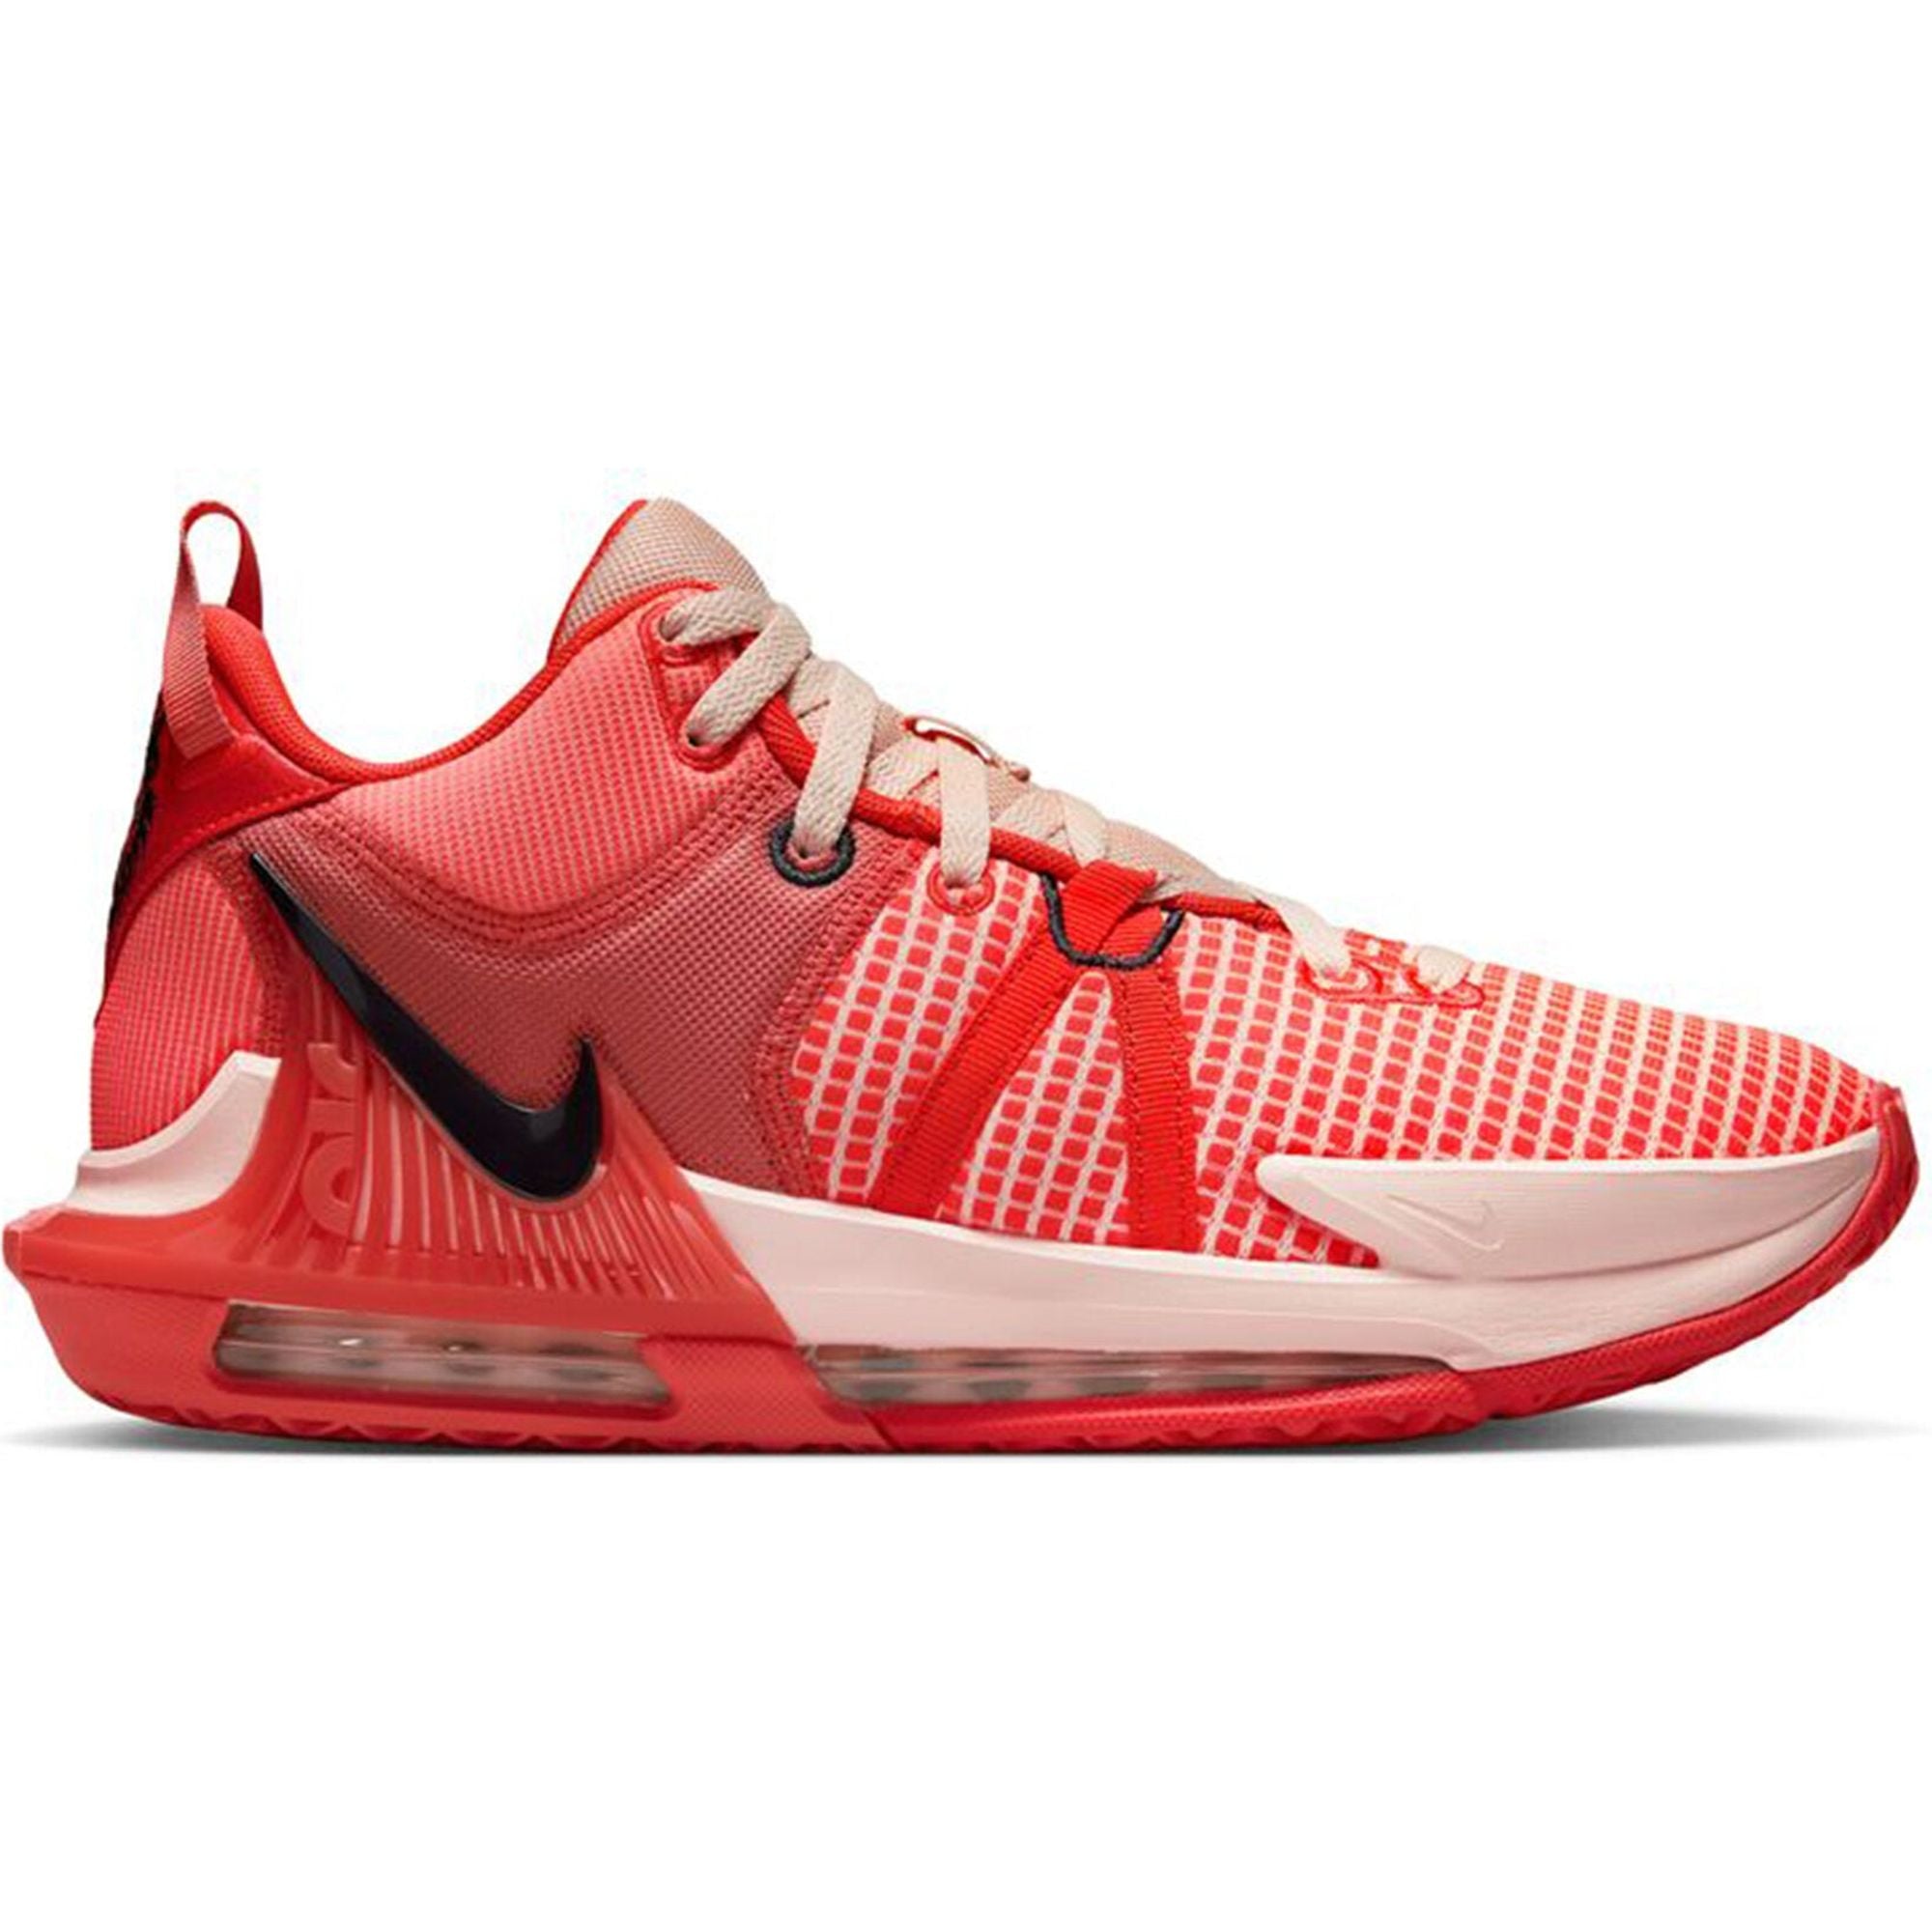 LeBron Witness 7 Red